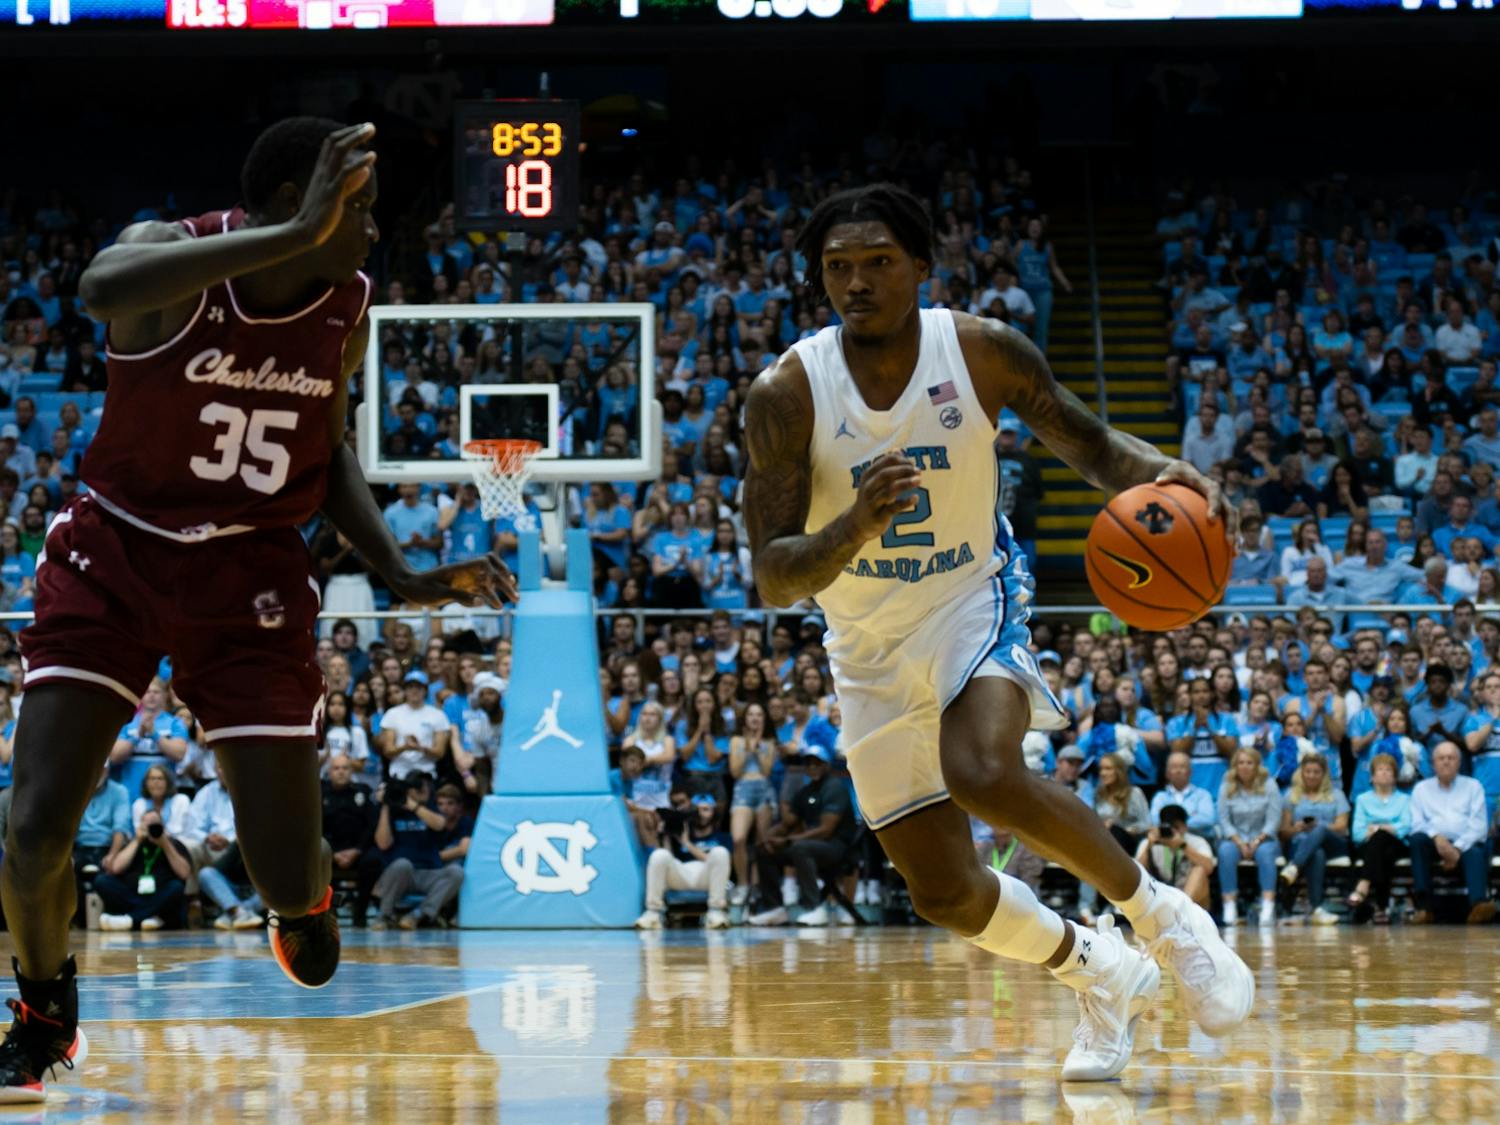 UNC junior guard Caleb Love (2) drives toward the basket during UNC's match against College of Charleston on Friday, Nov. 11, 2022 at the Dean Smith Center.